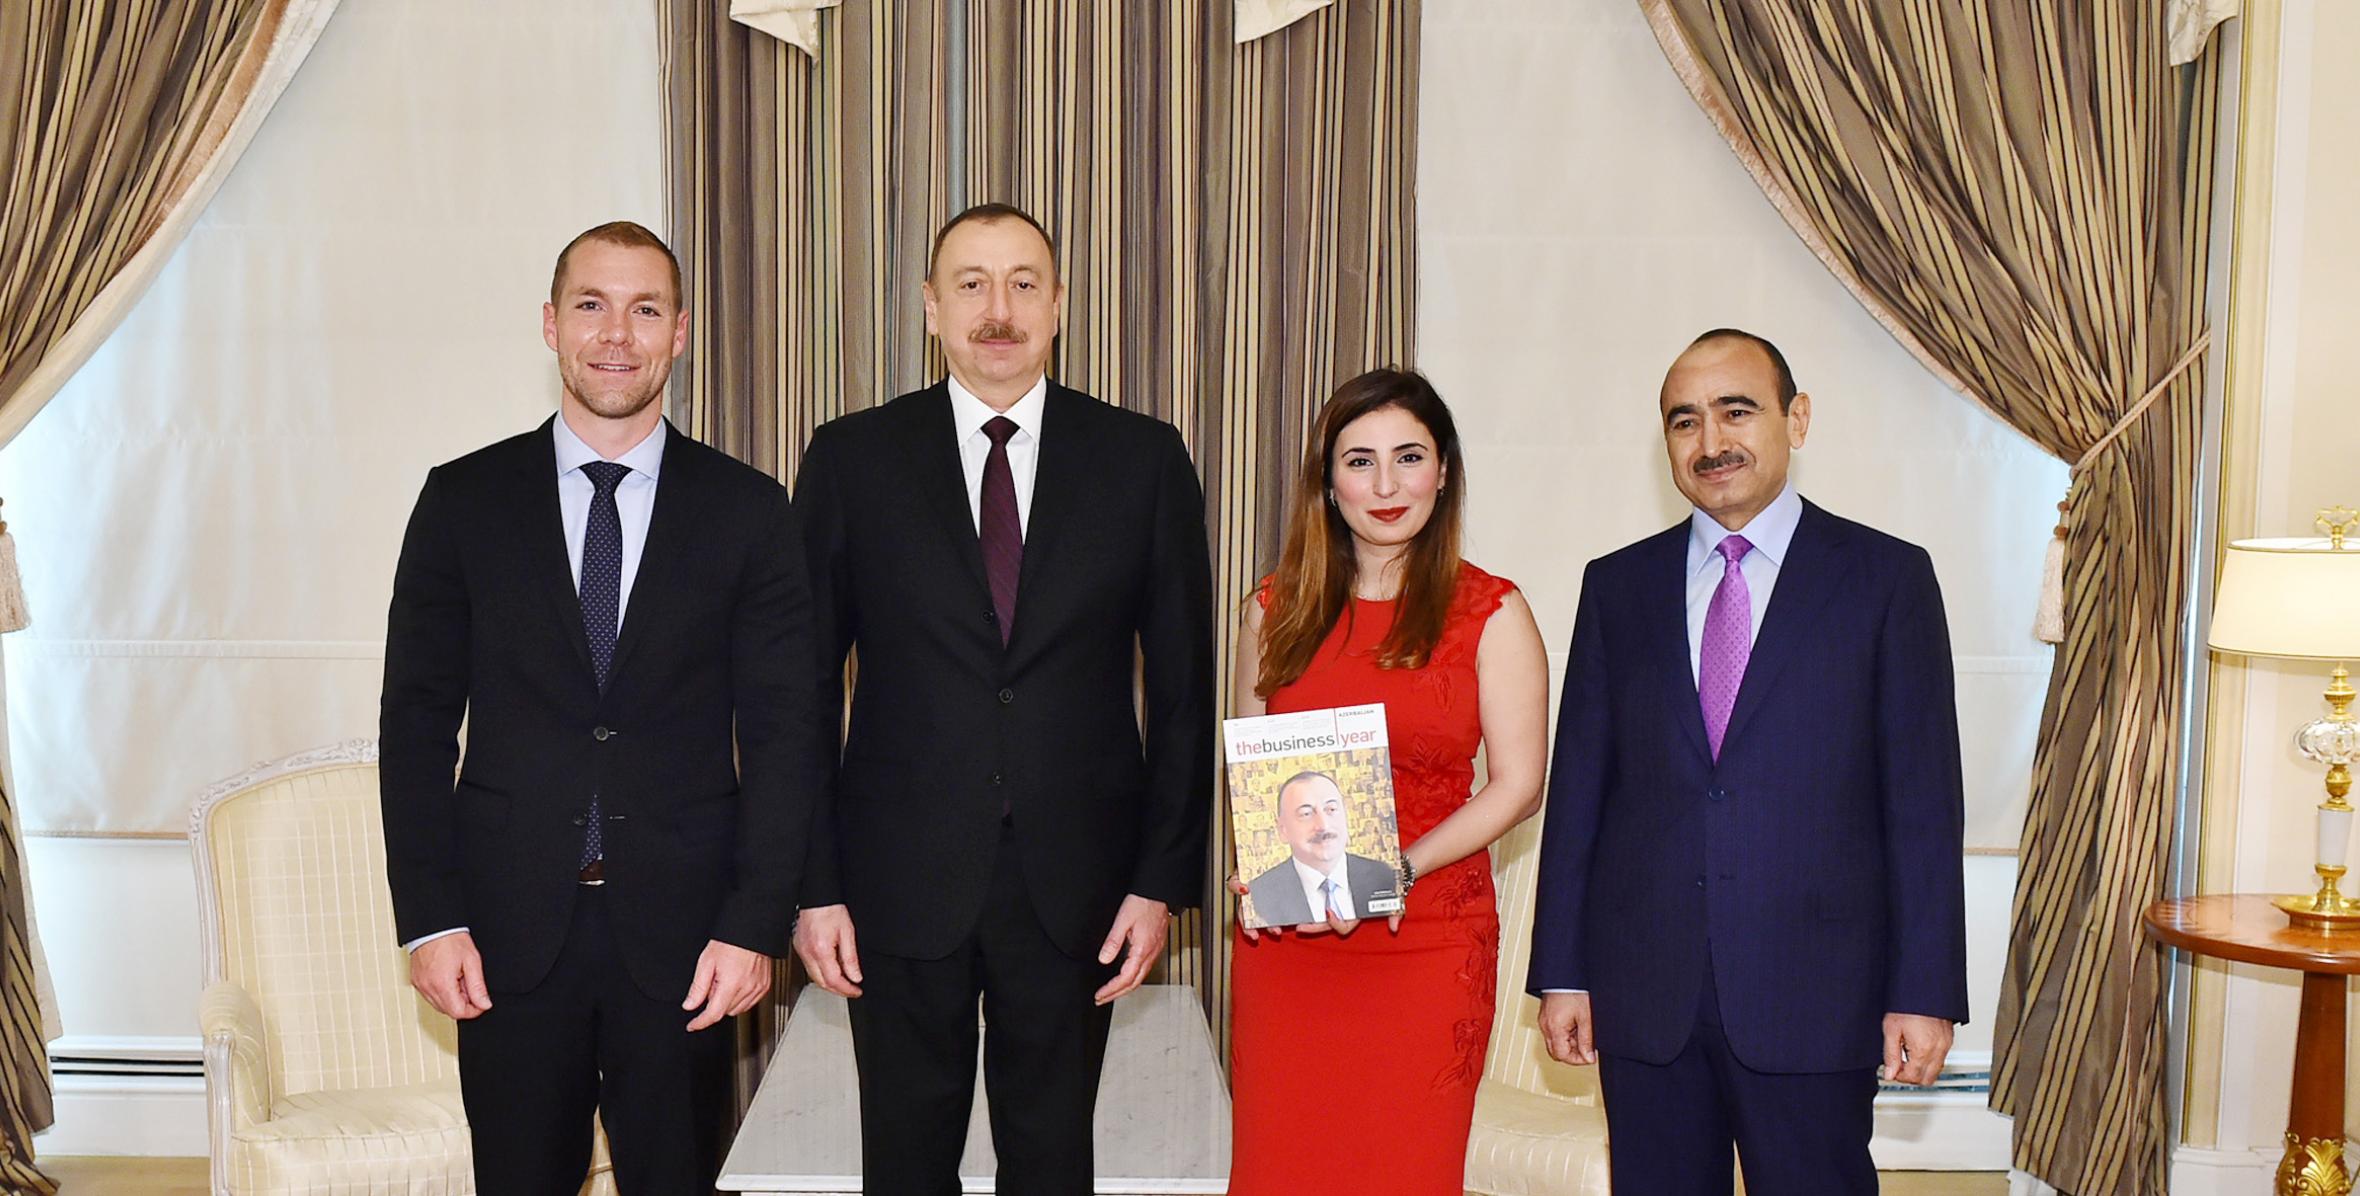 Ilham Aliyev received Editor-in-Chief and Regional Director of The Business Year magazine